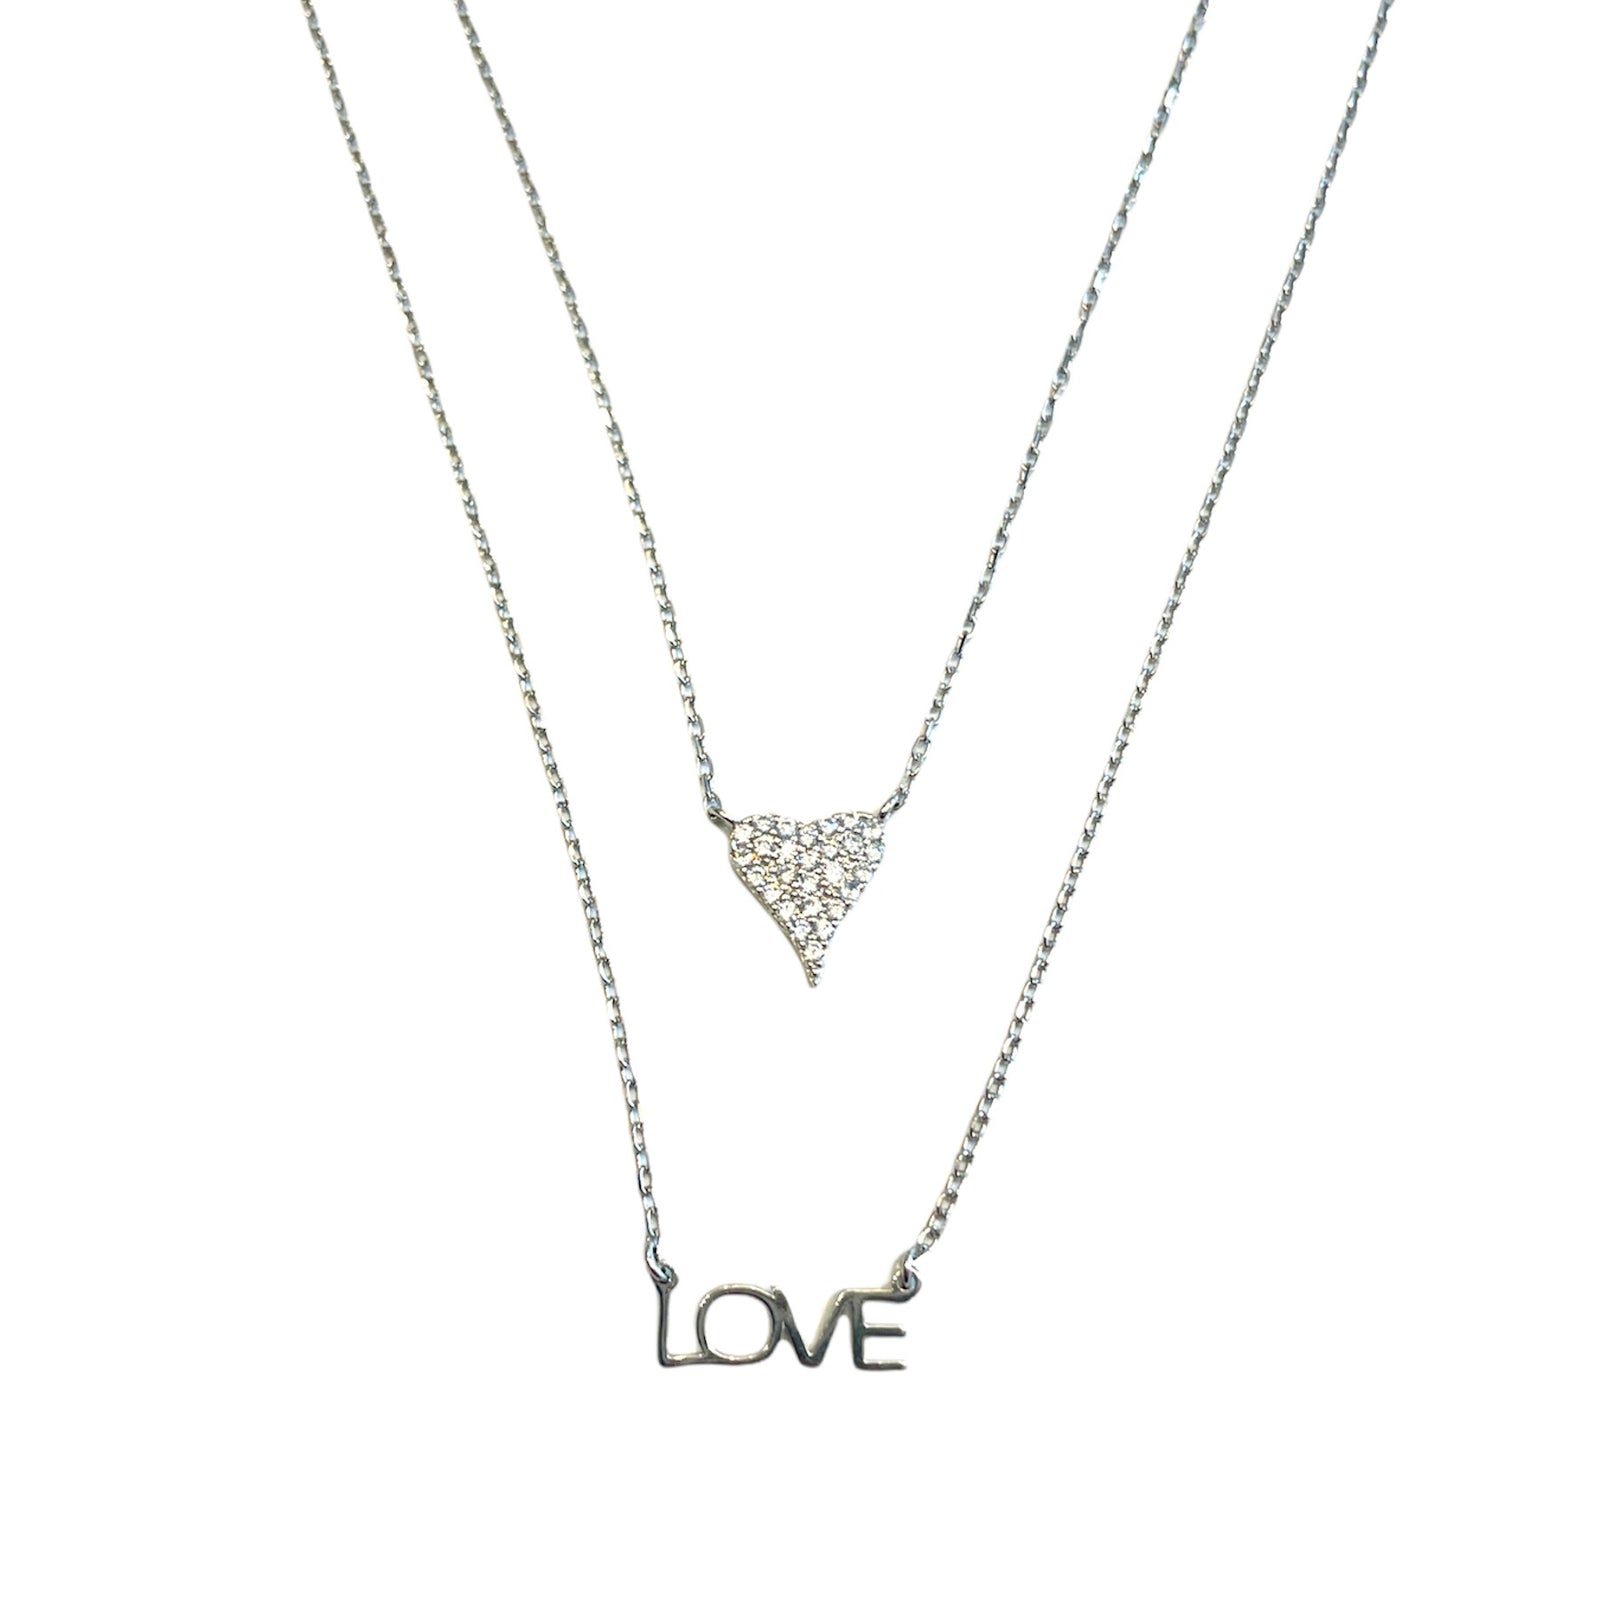 Love-Heart double Necklace